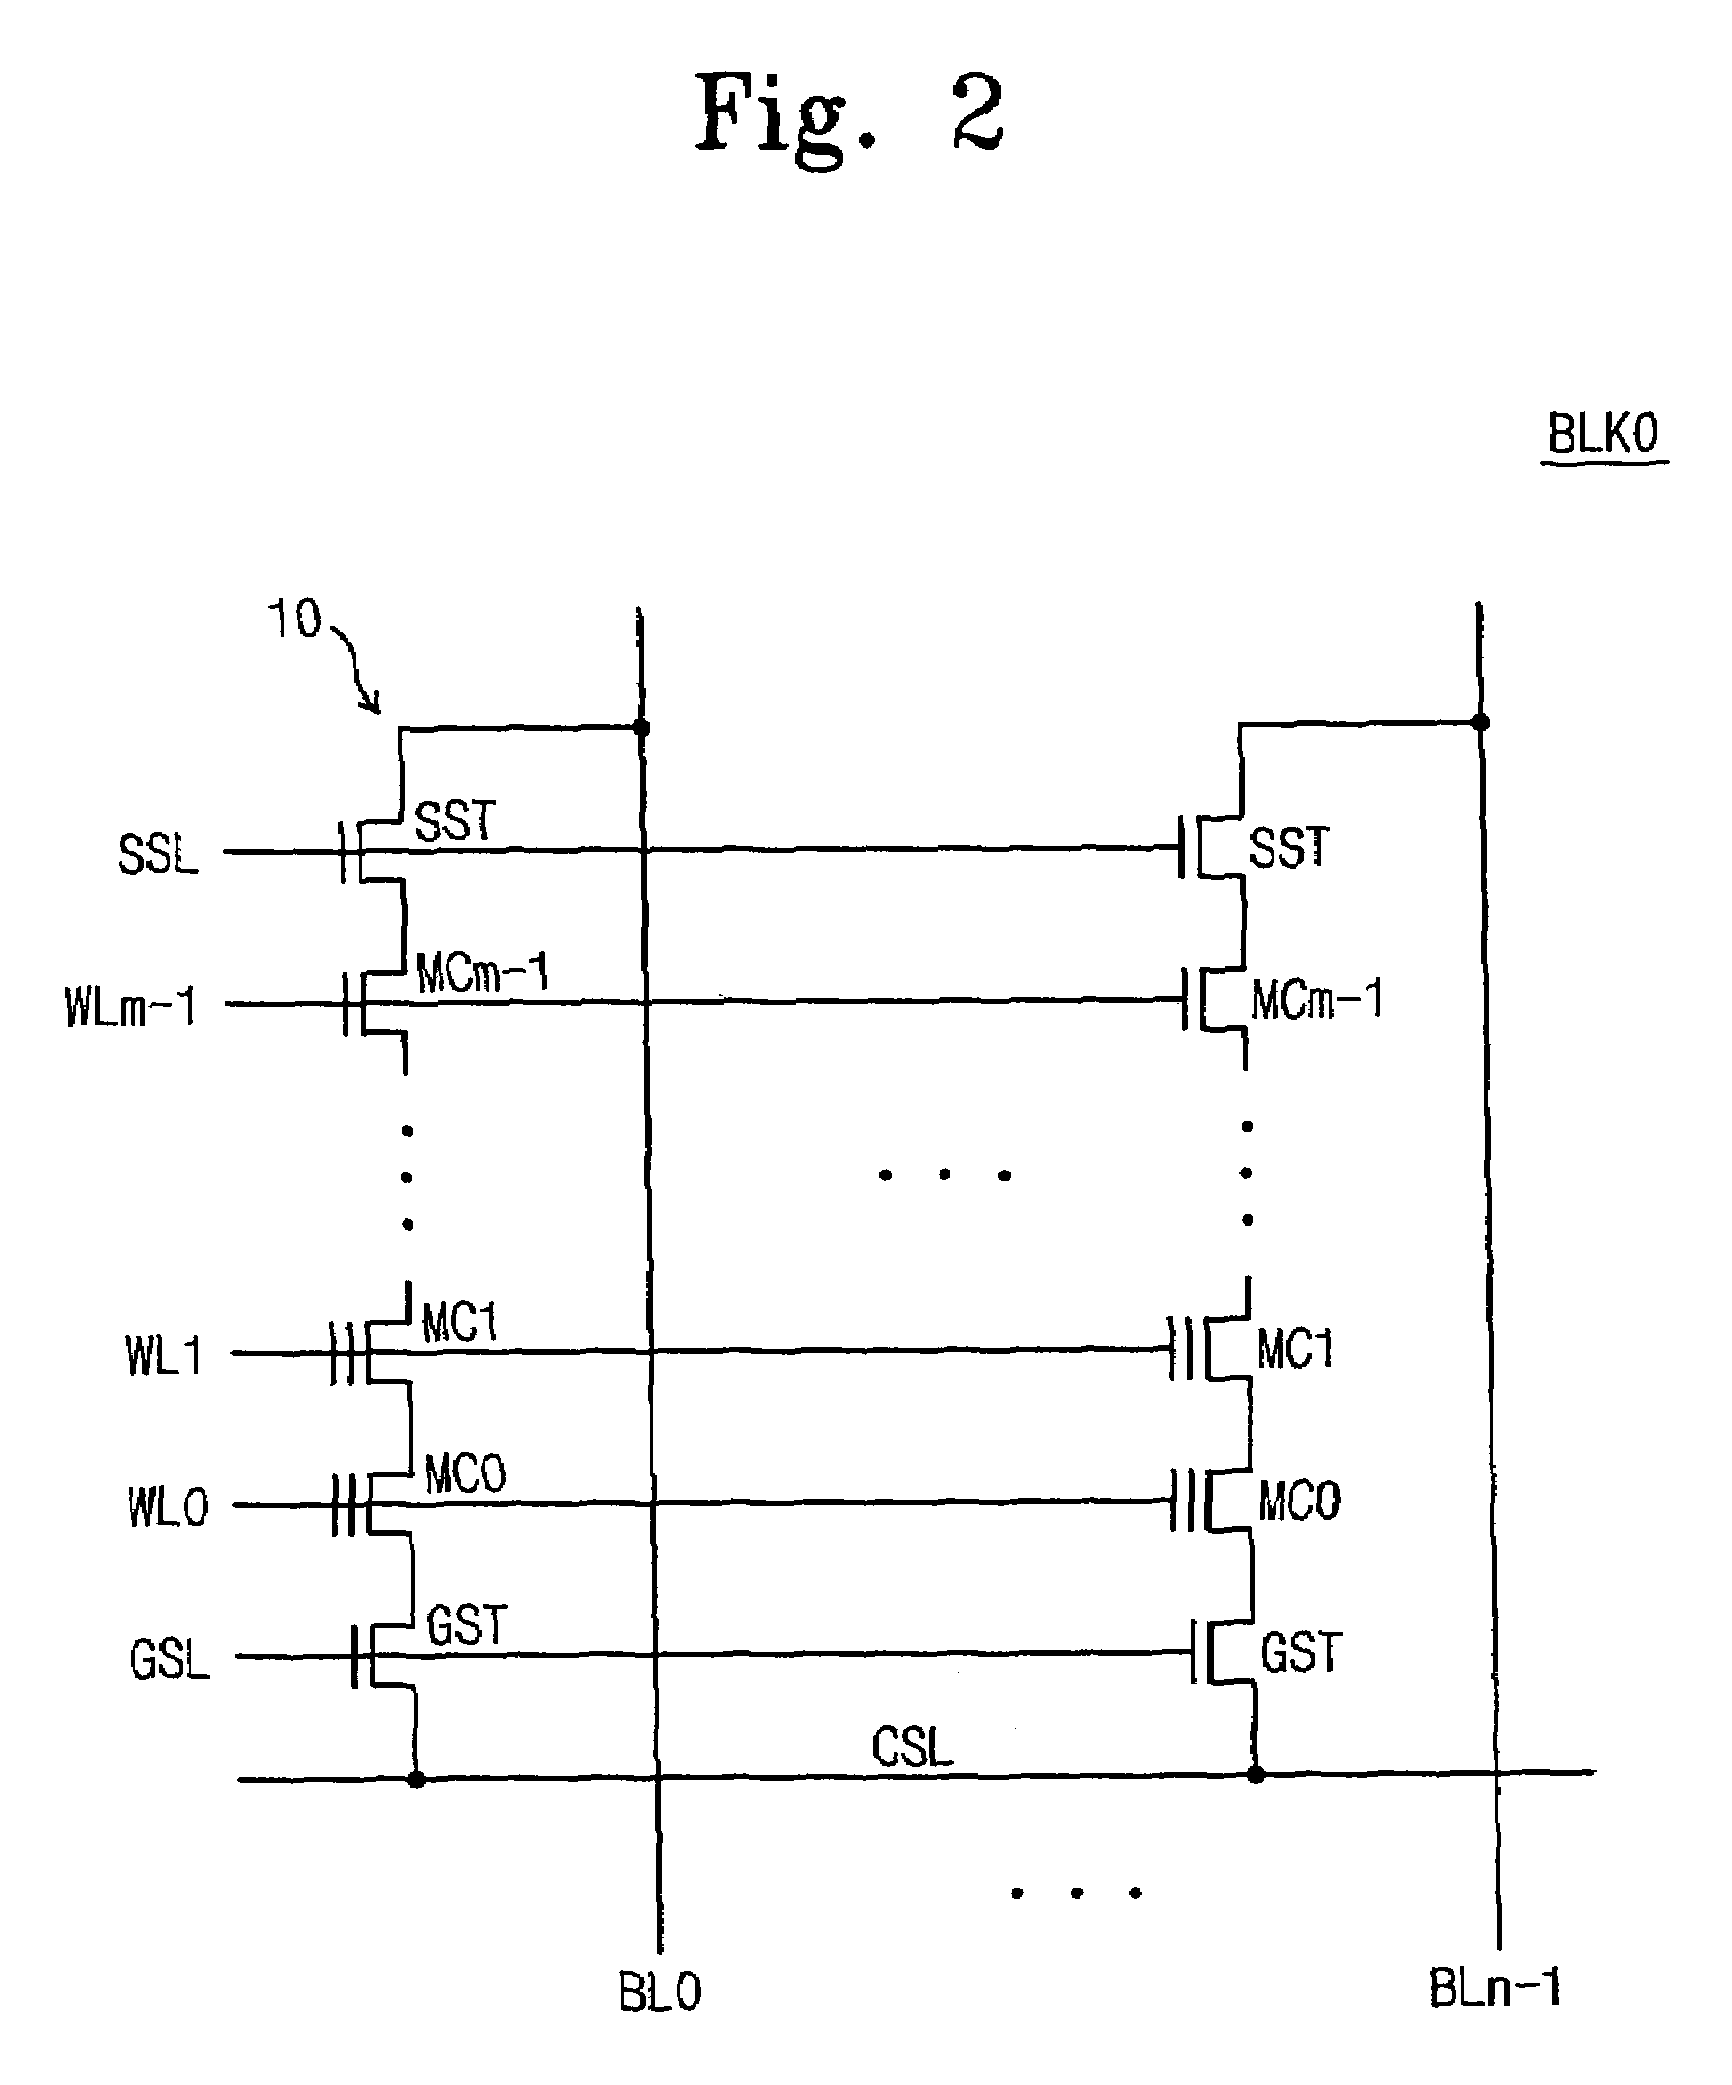 Flash memory device capable of storing multi-bit data and single-big data